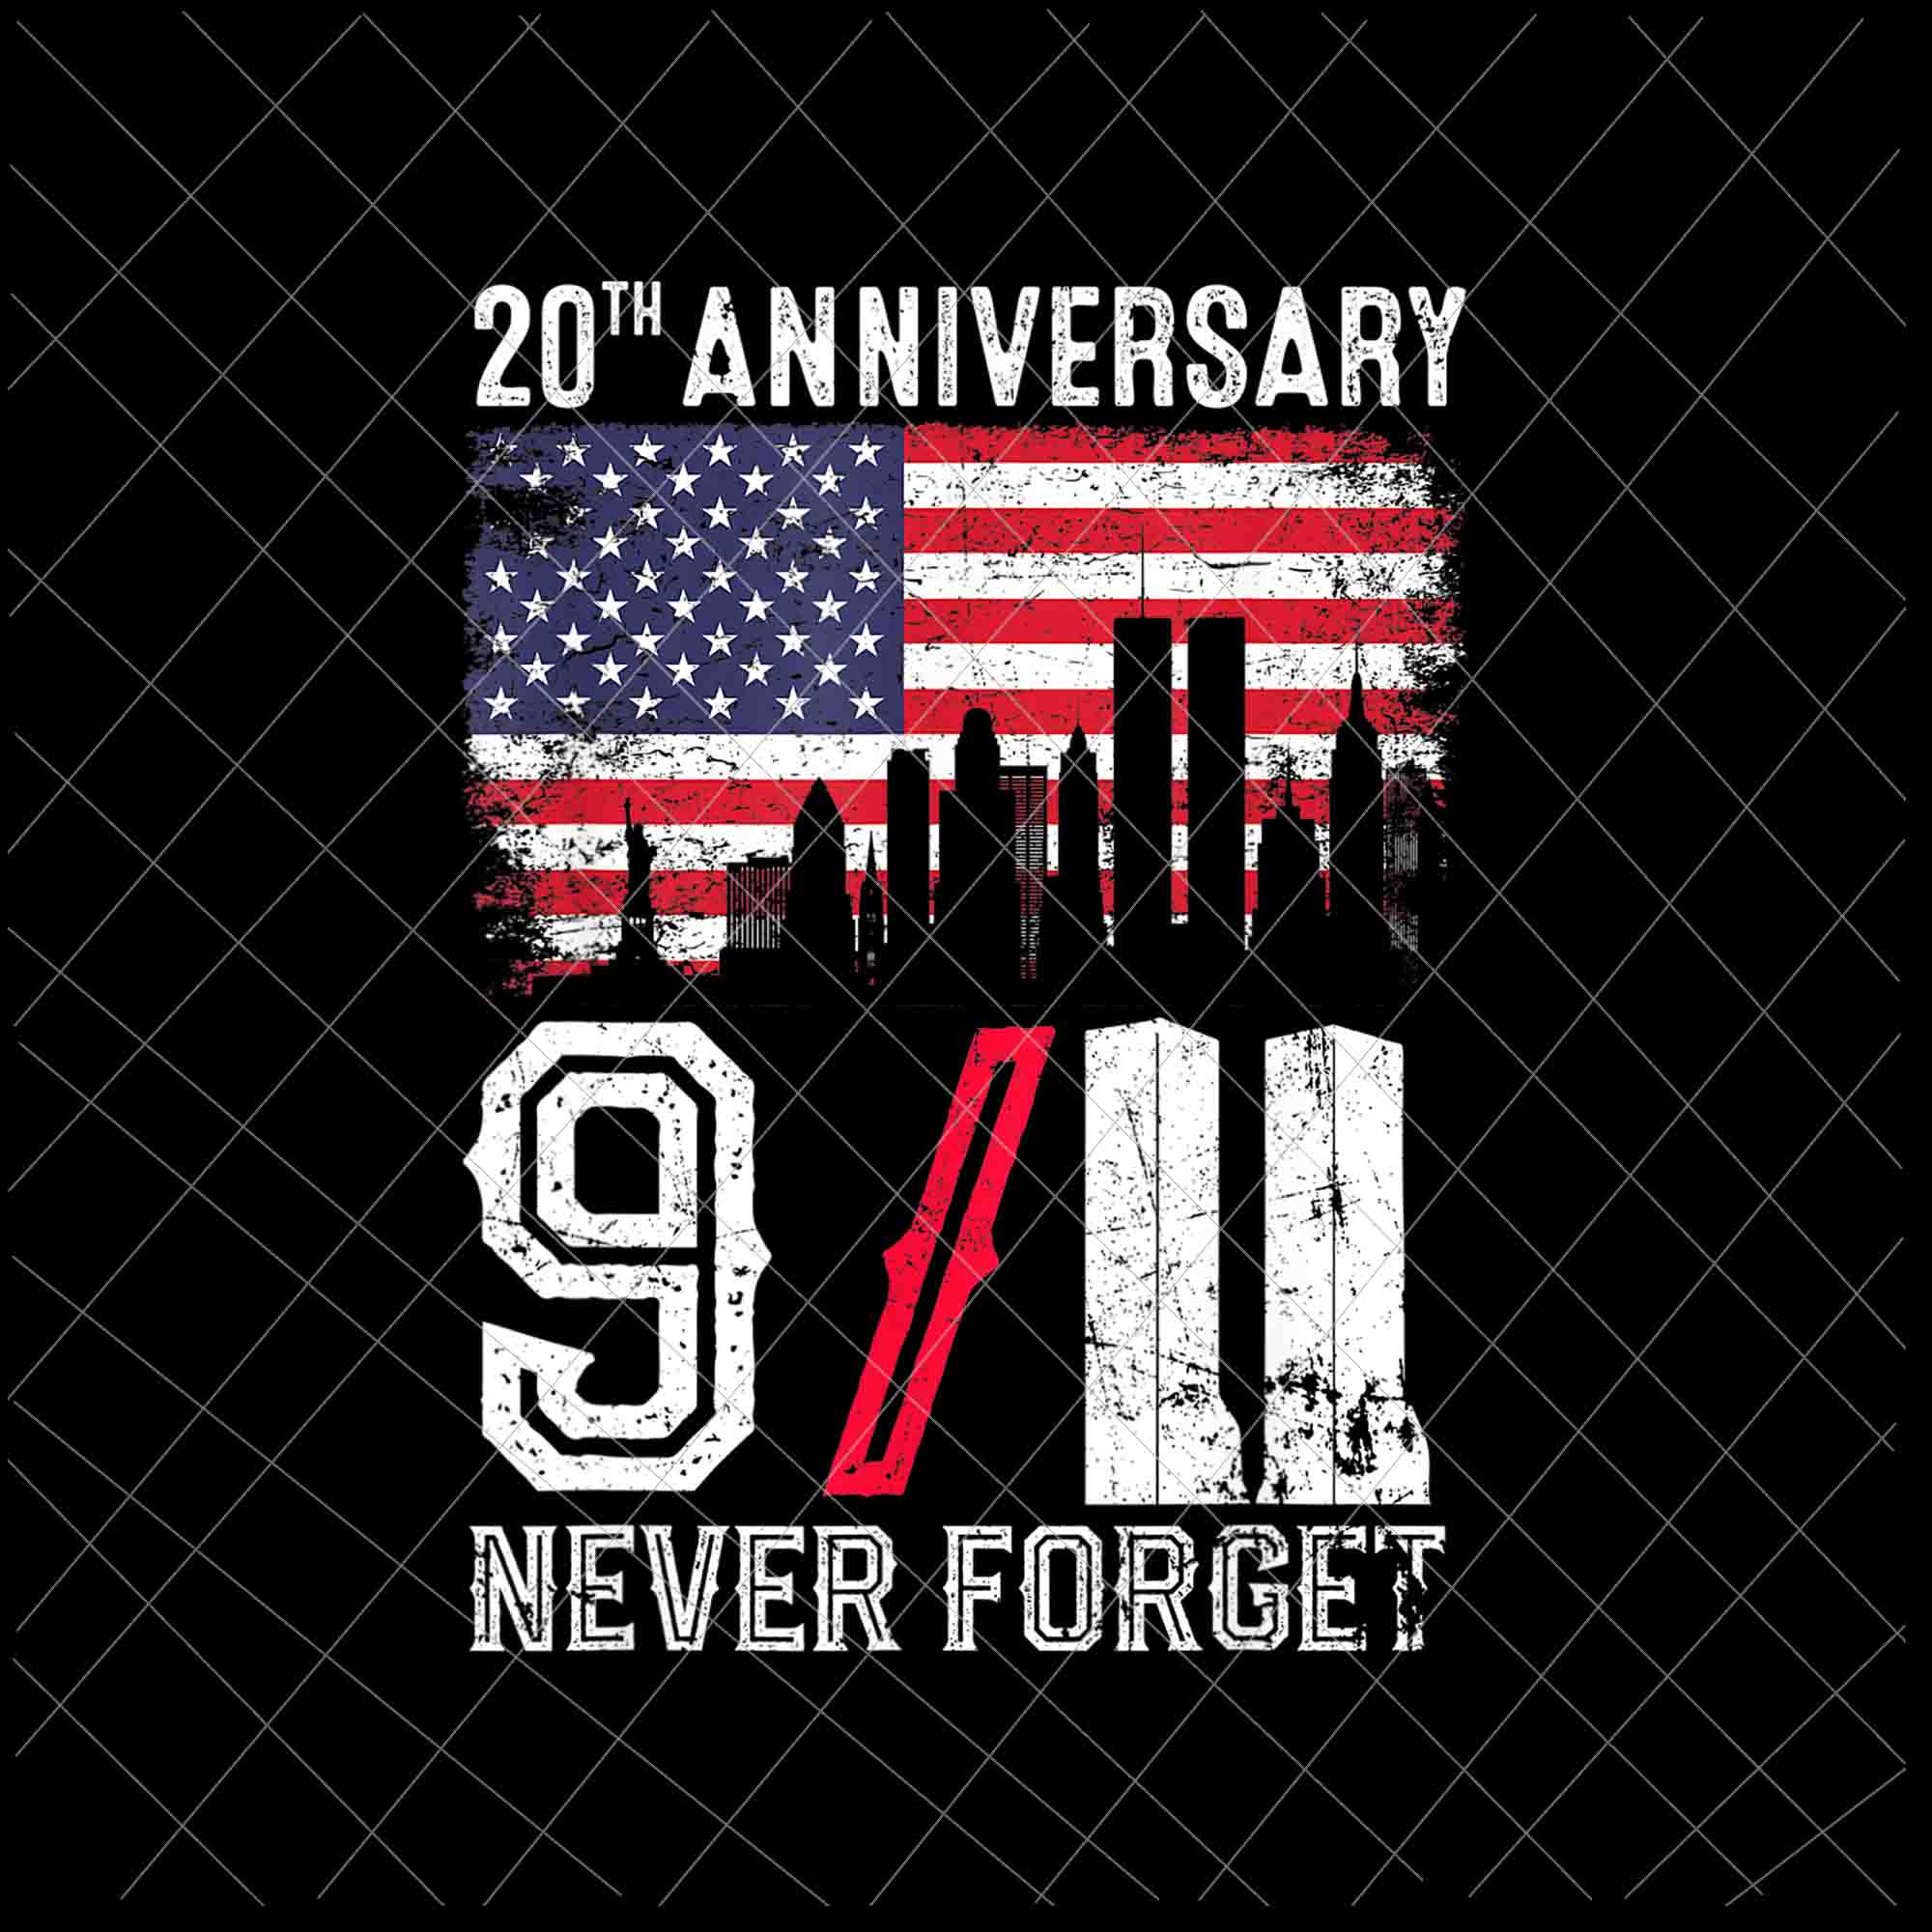 Never Forget 9_11 20th Anniversary Patriot Day 2021 Png, 11th September Patriot Day design png, We will Never Forget National Day Remembrance, 9/11 design